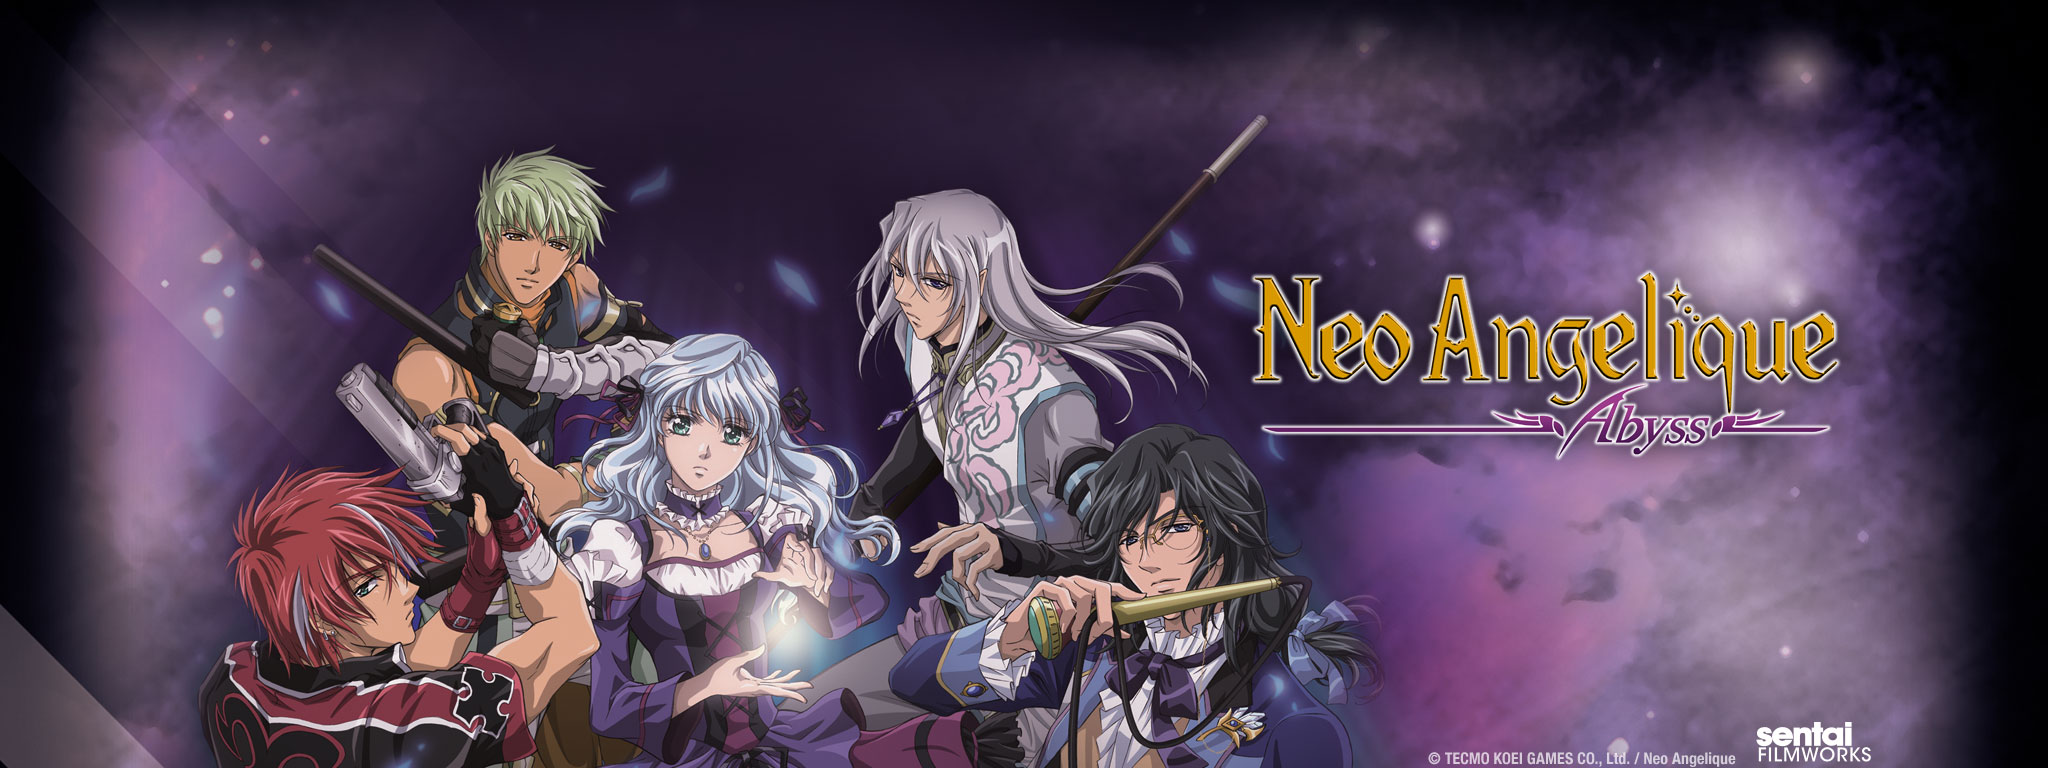 Title Art for Neo Angelique Abyss